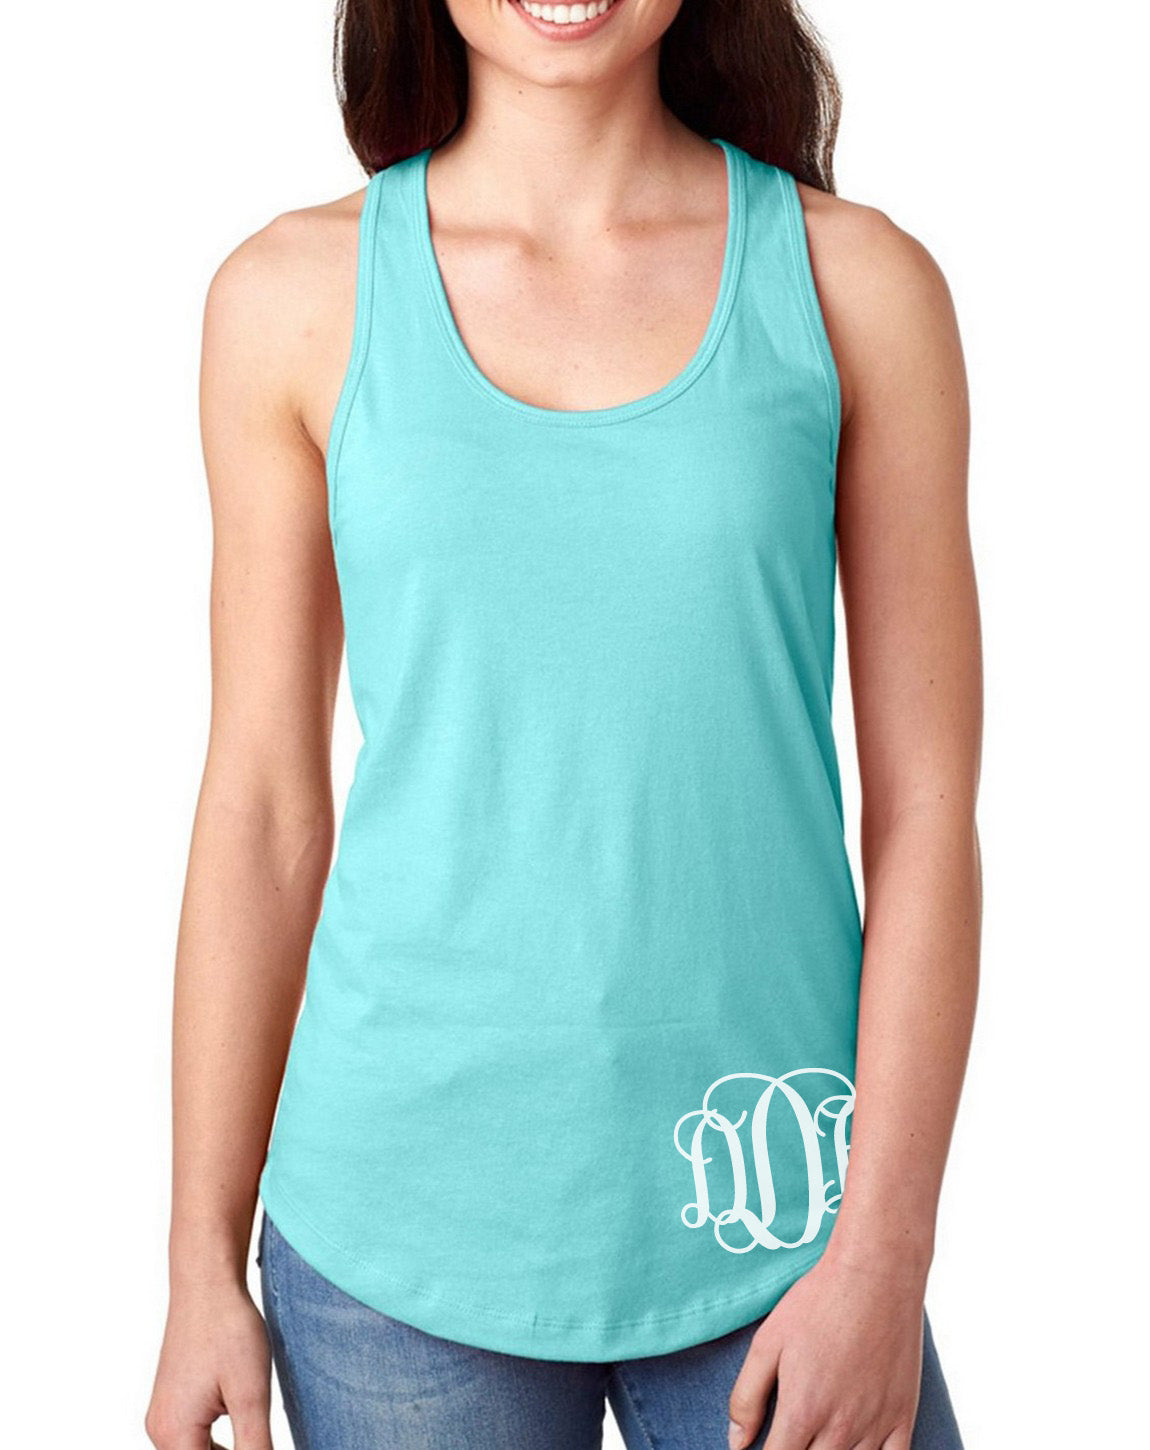 Next Level Fitted Tanks (Blank OR Monogrammed)